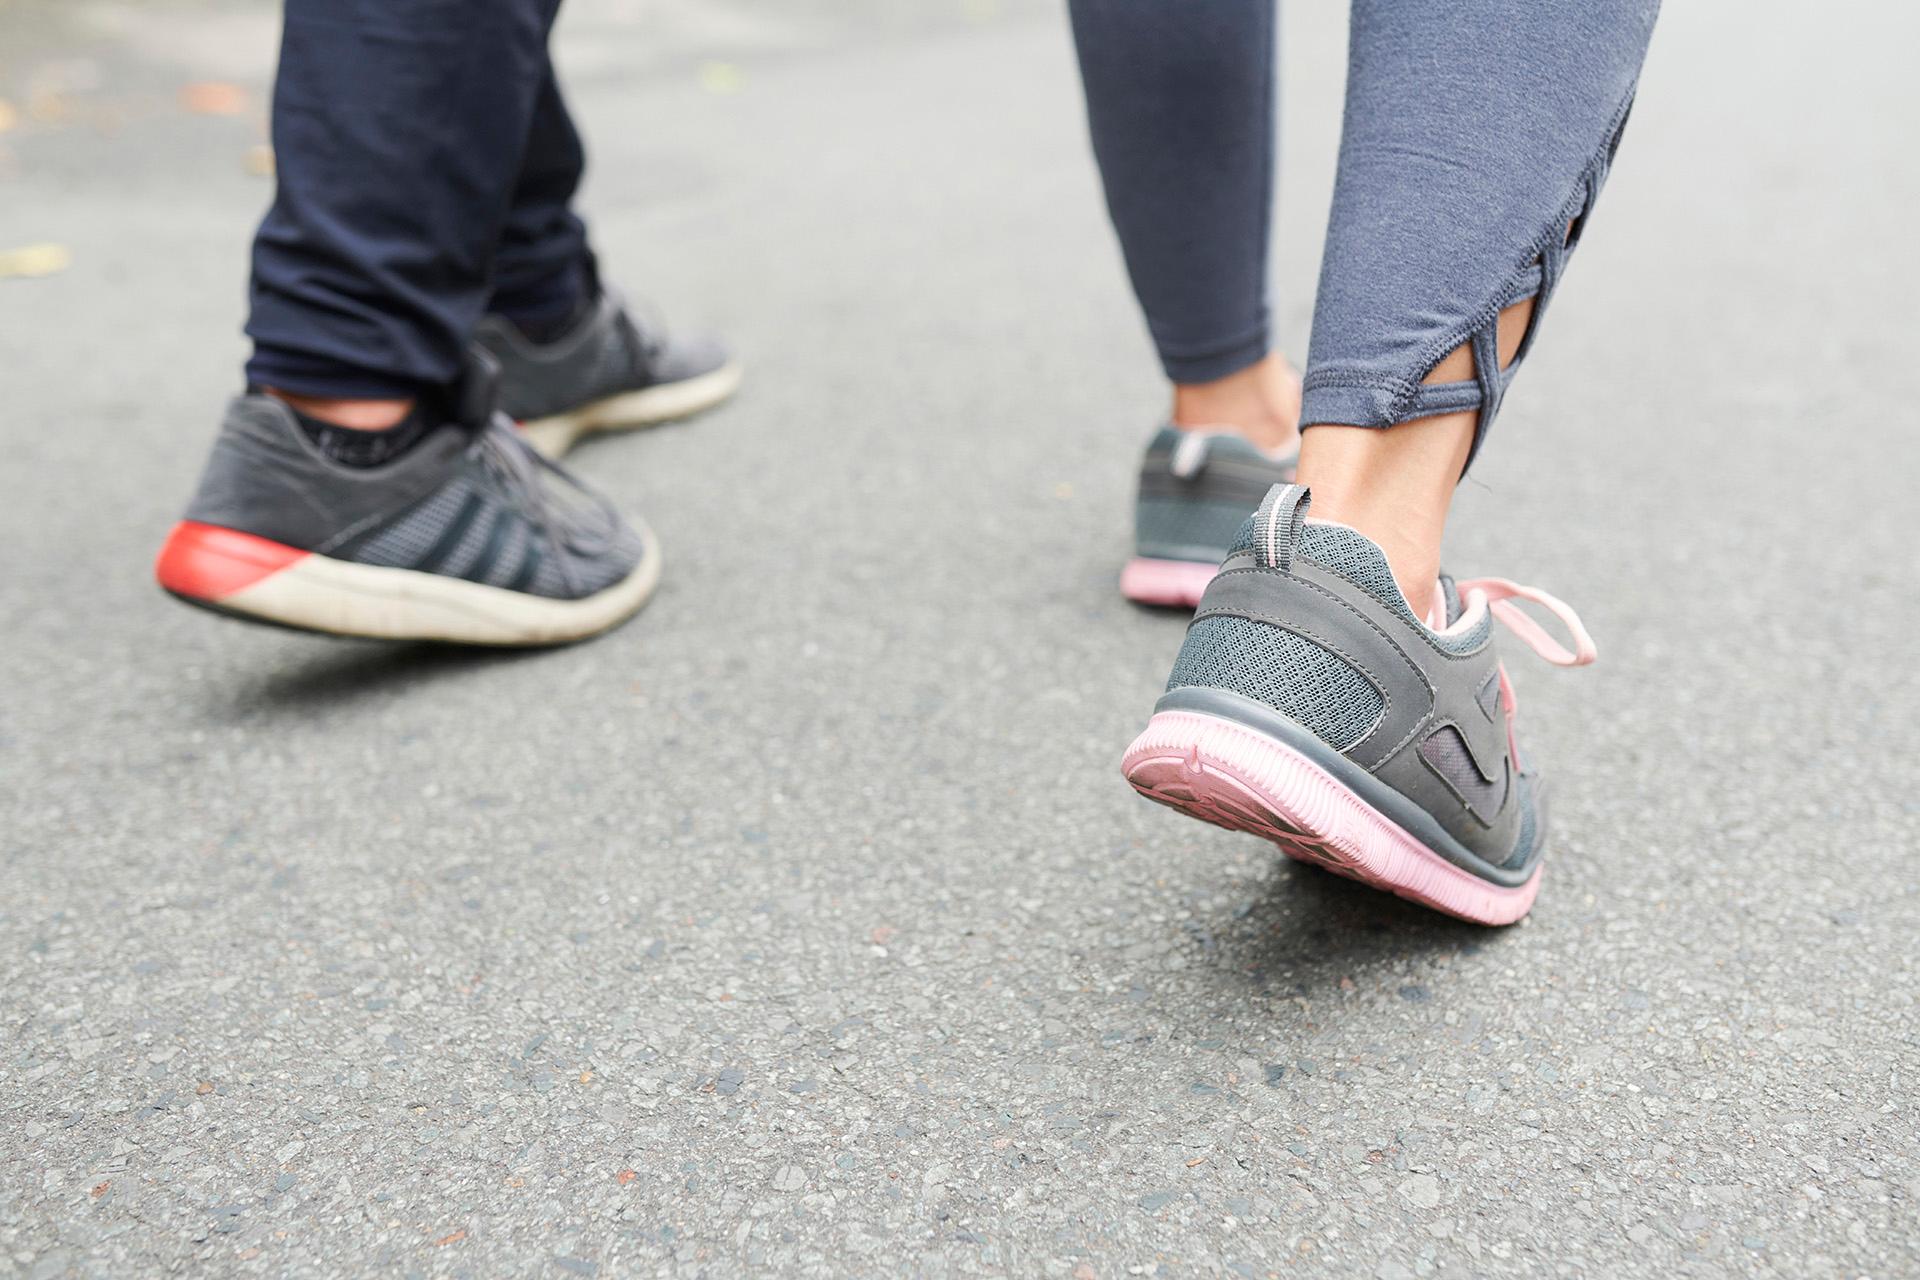 6-Minute Walk Test: What is it and Why is it Done?